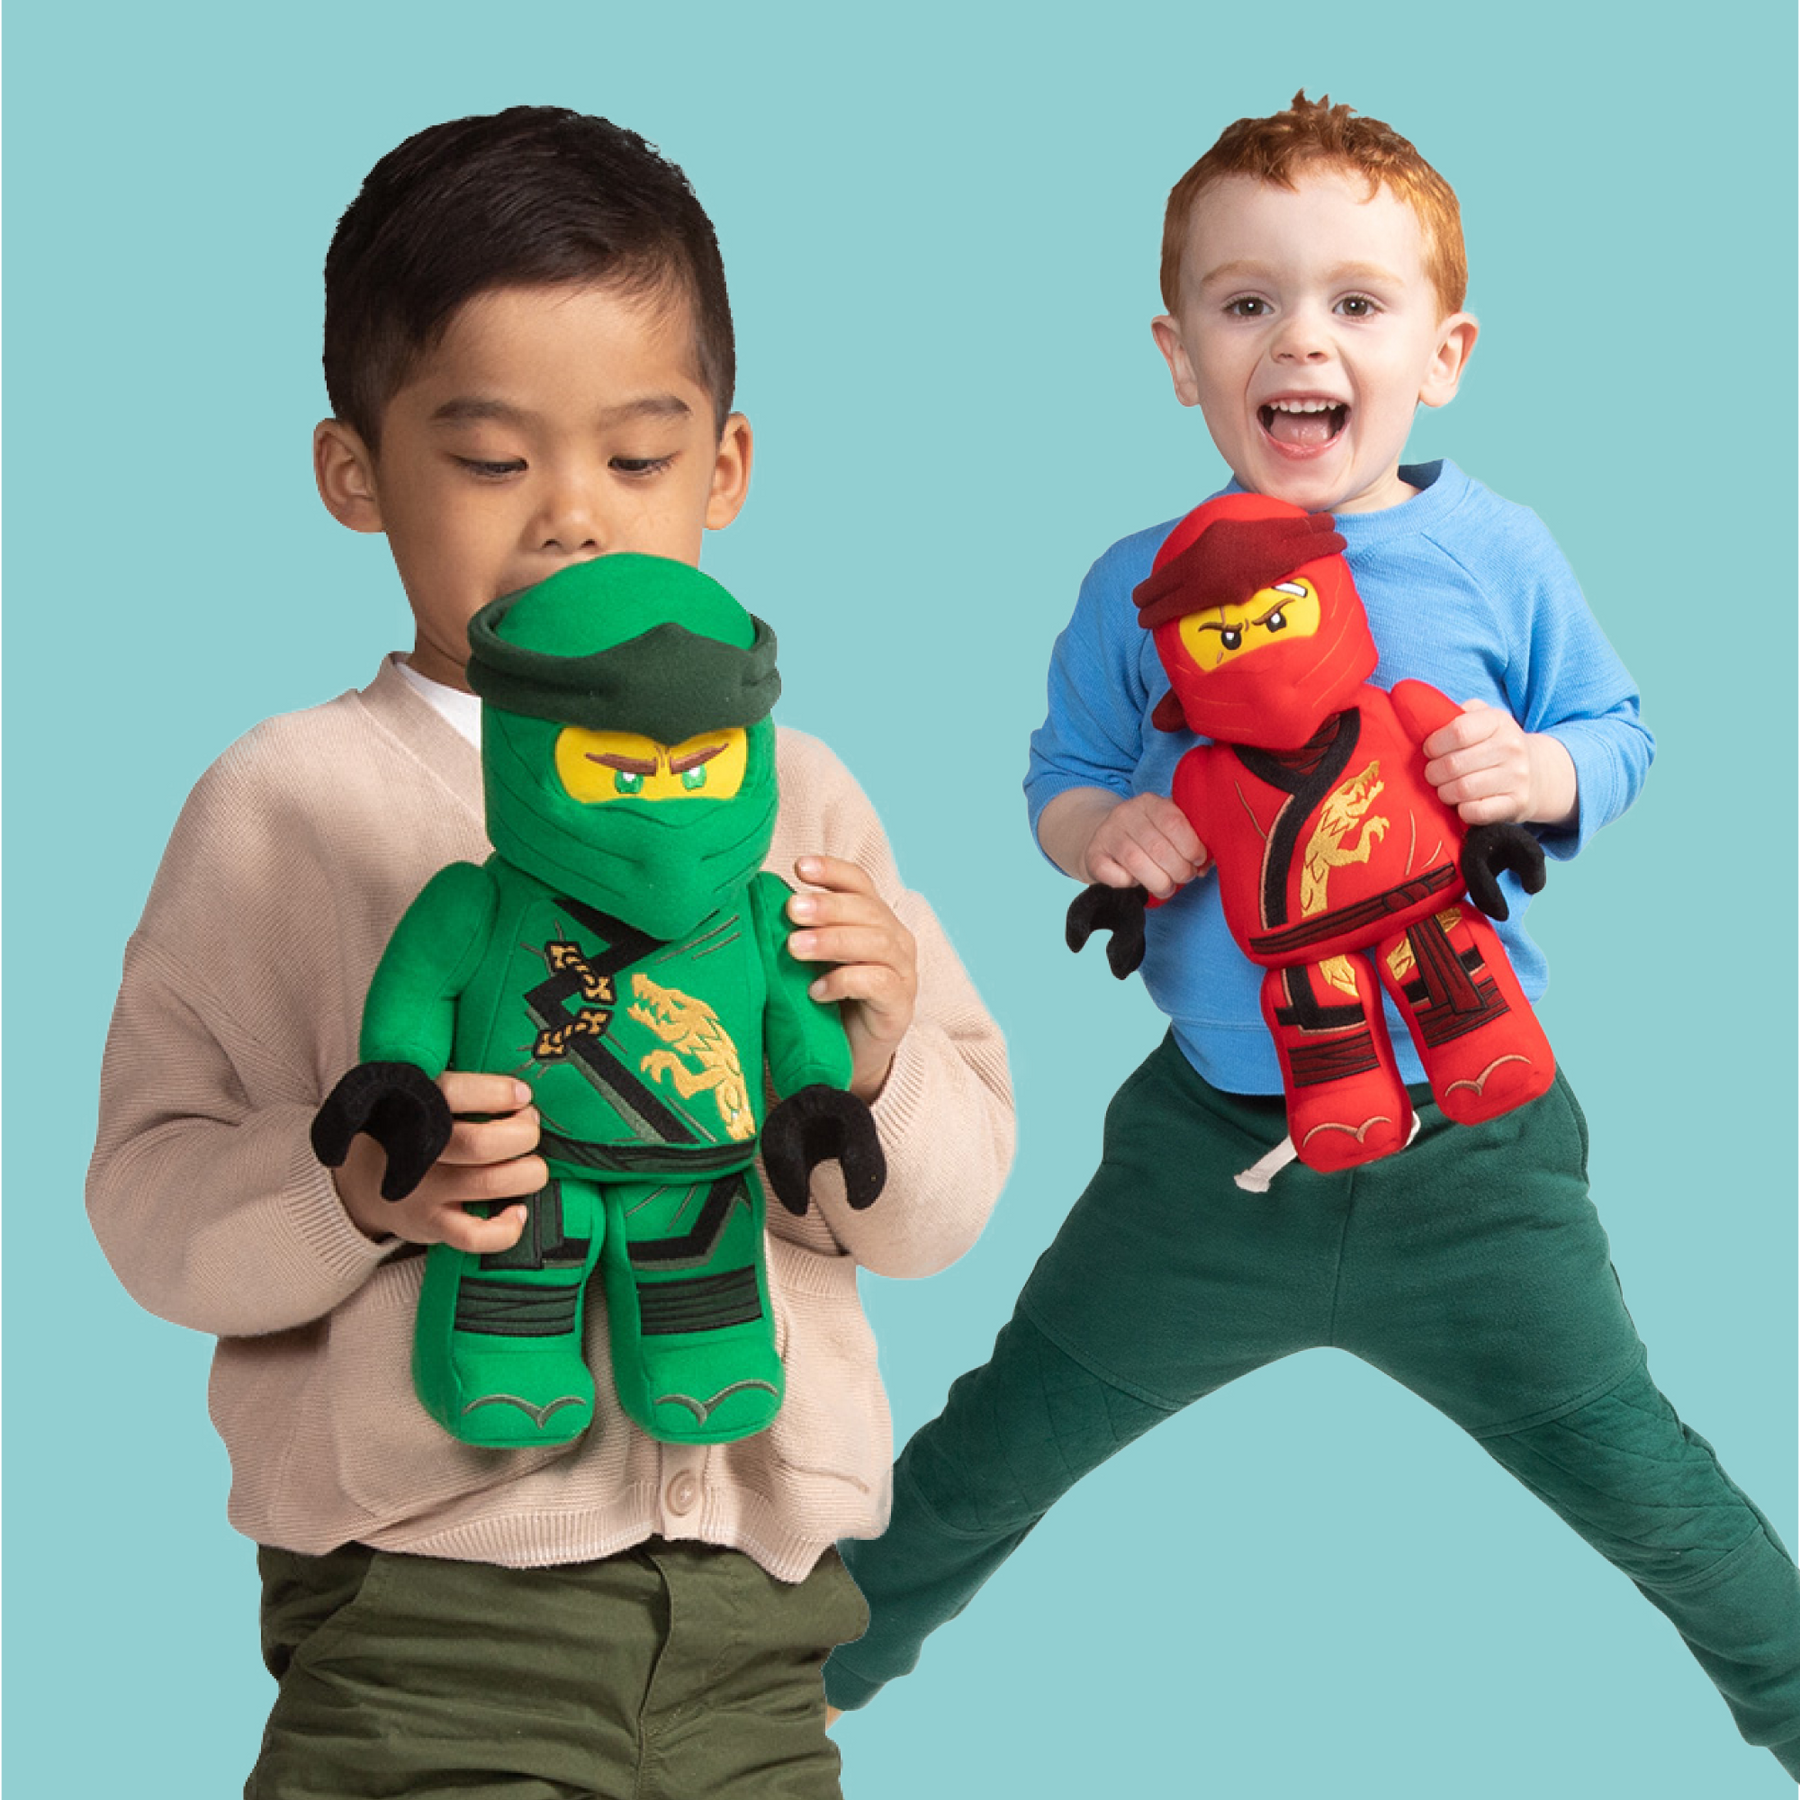 Two boys playing with LEGO Ninjago plush characters on blue background